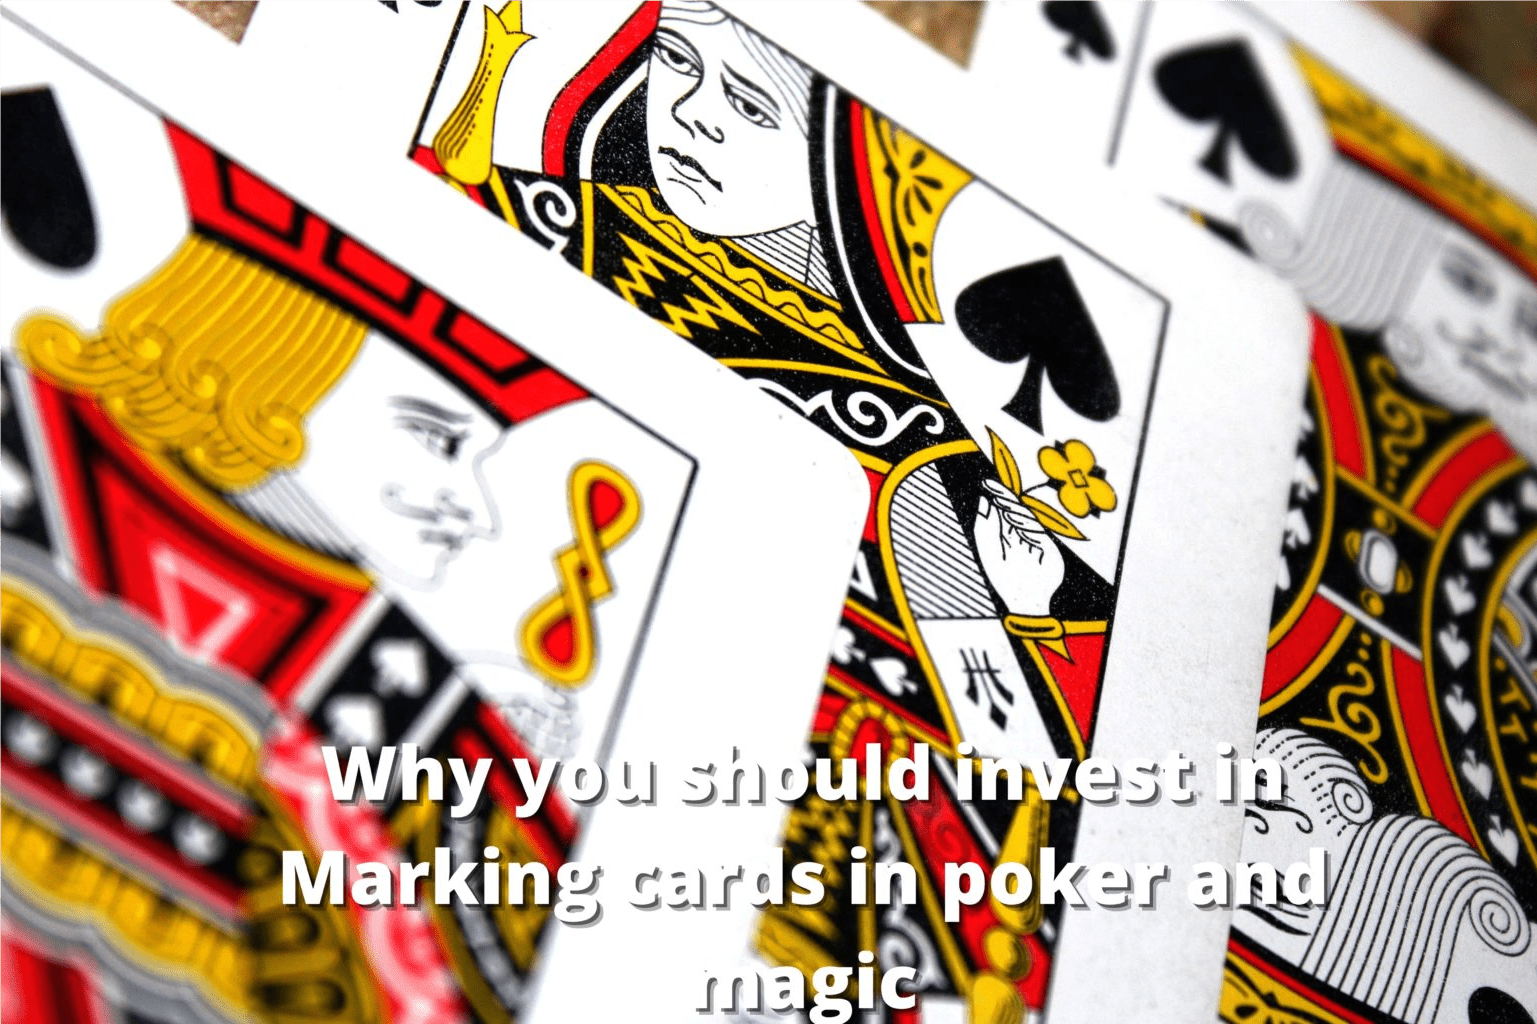 Why You Should Invest In Marking Cards In Poker And Magic